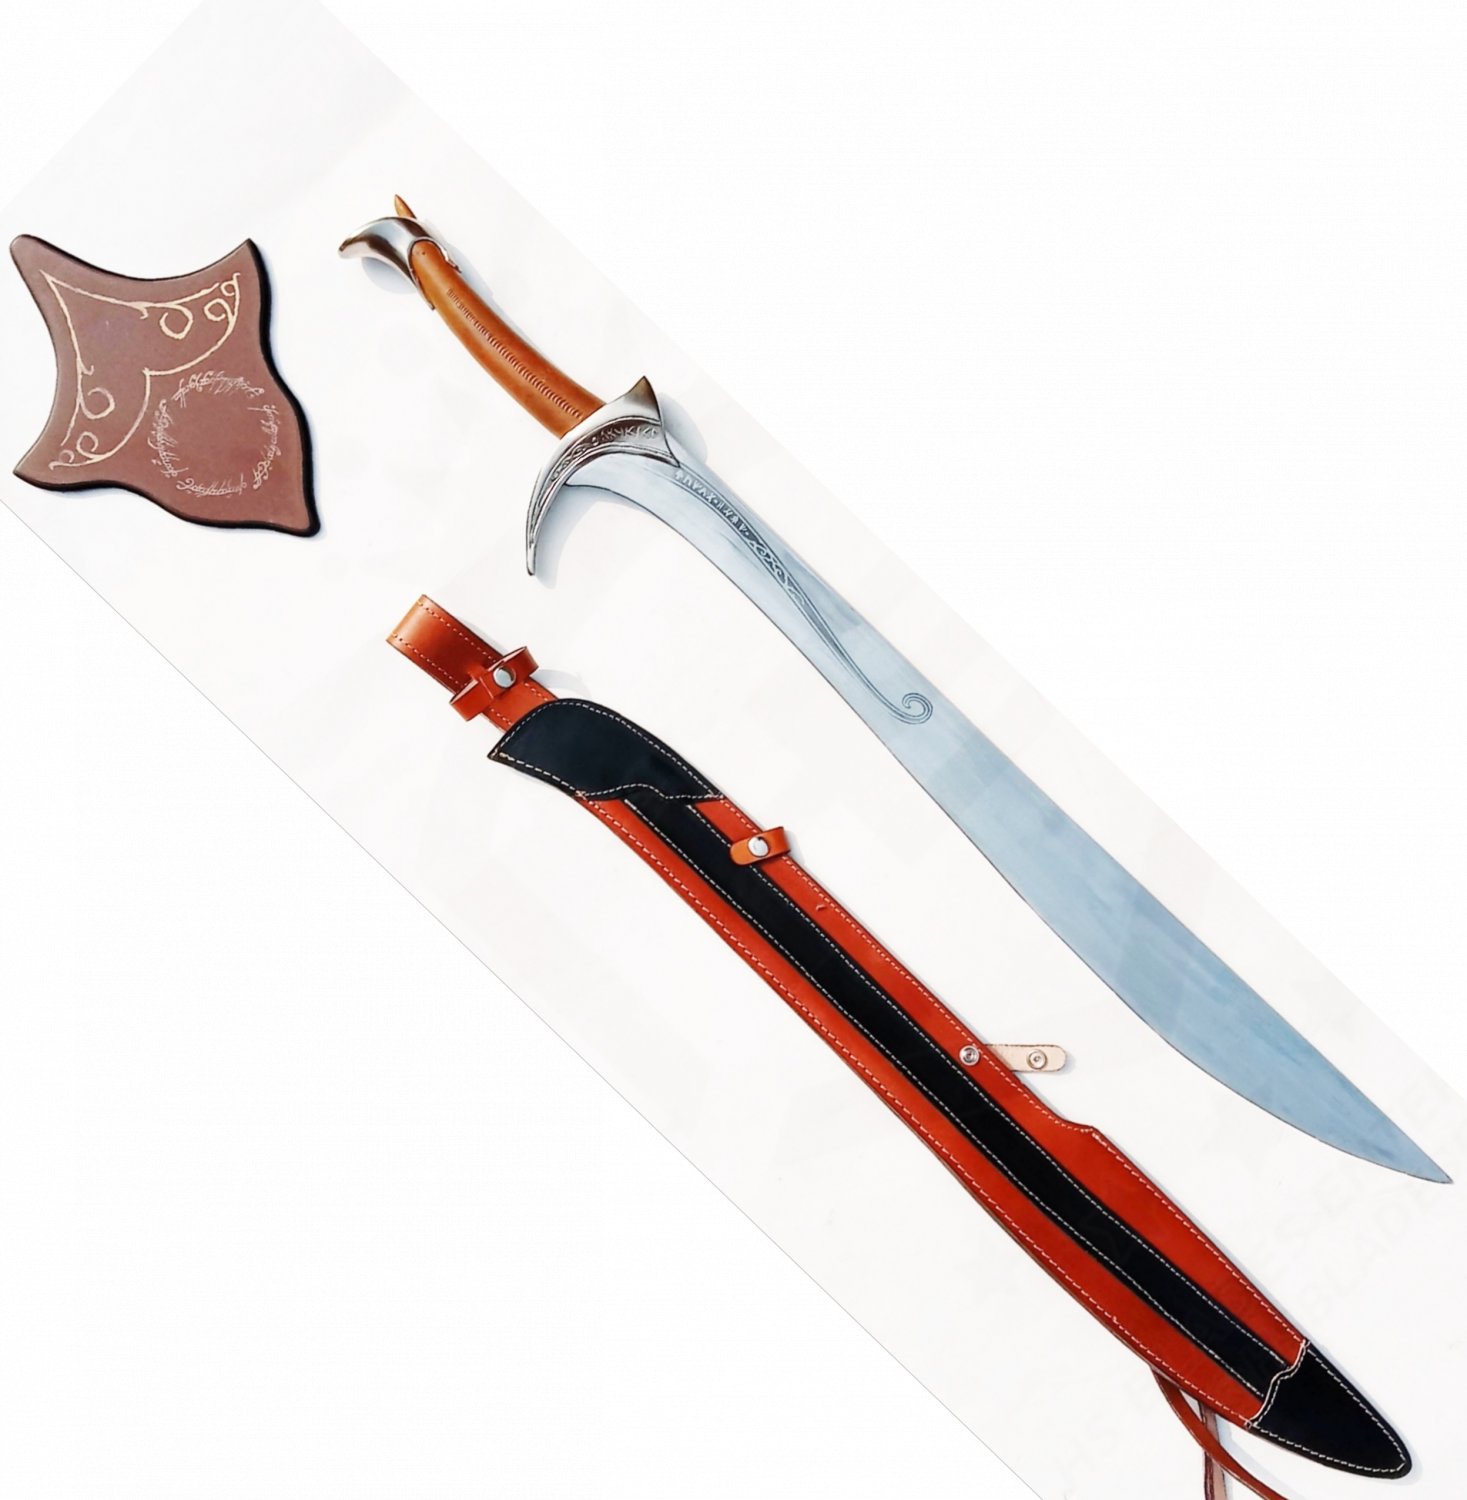 Carbon Steel Full Tang Orcrist Sword of Thorin Okenshield with Plaque & Sheath from The Hobbit